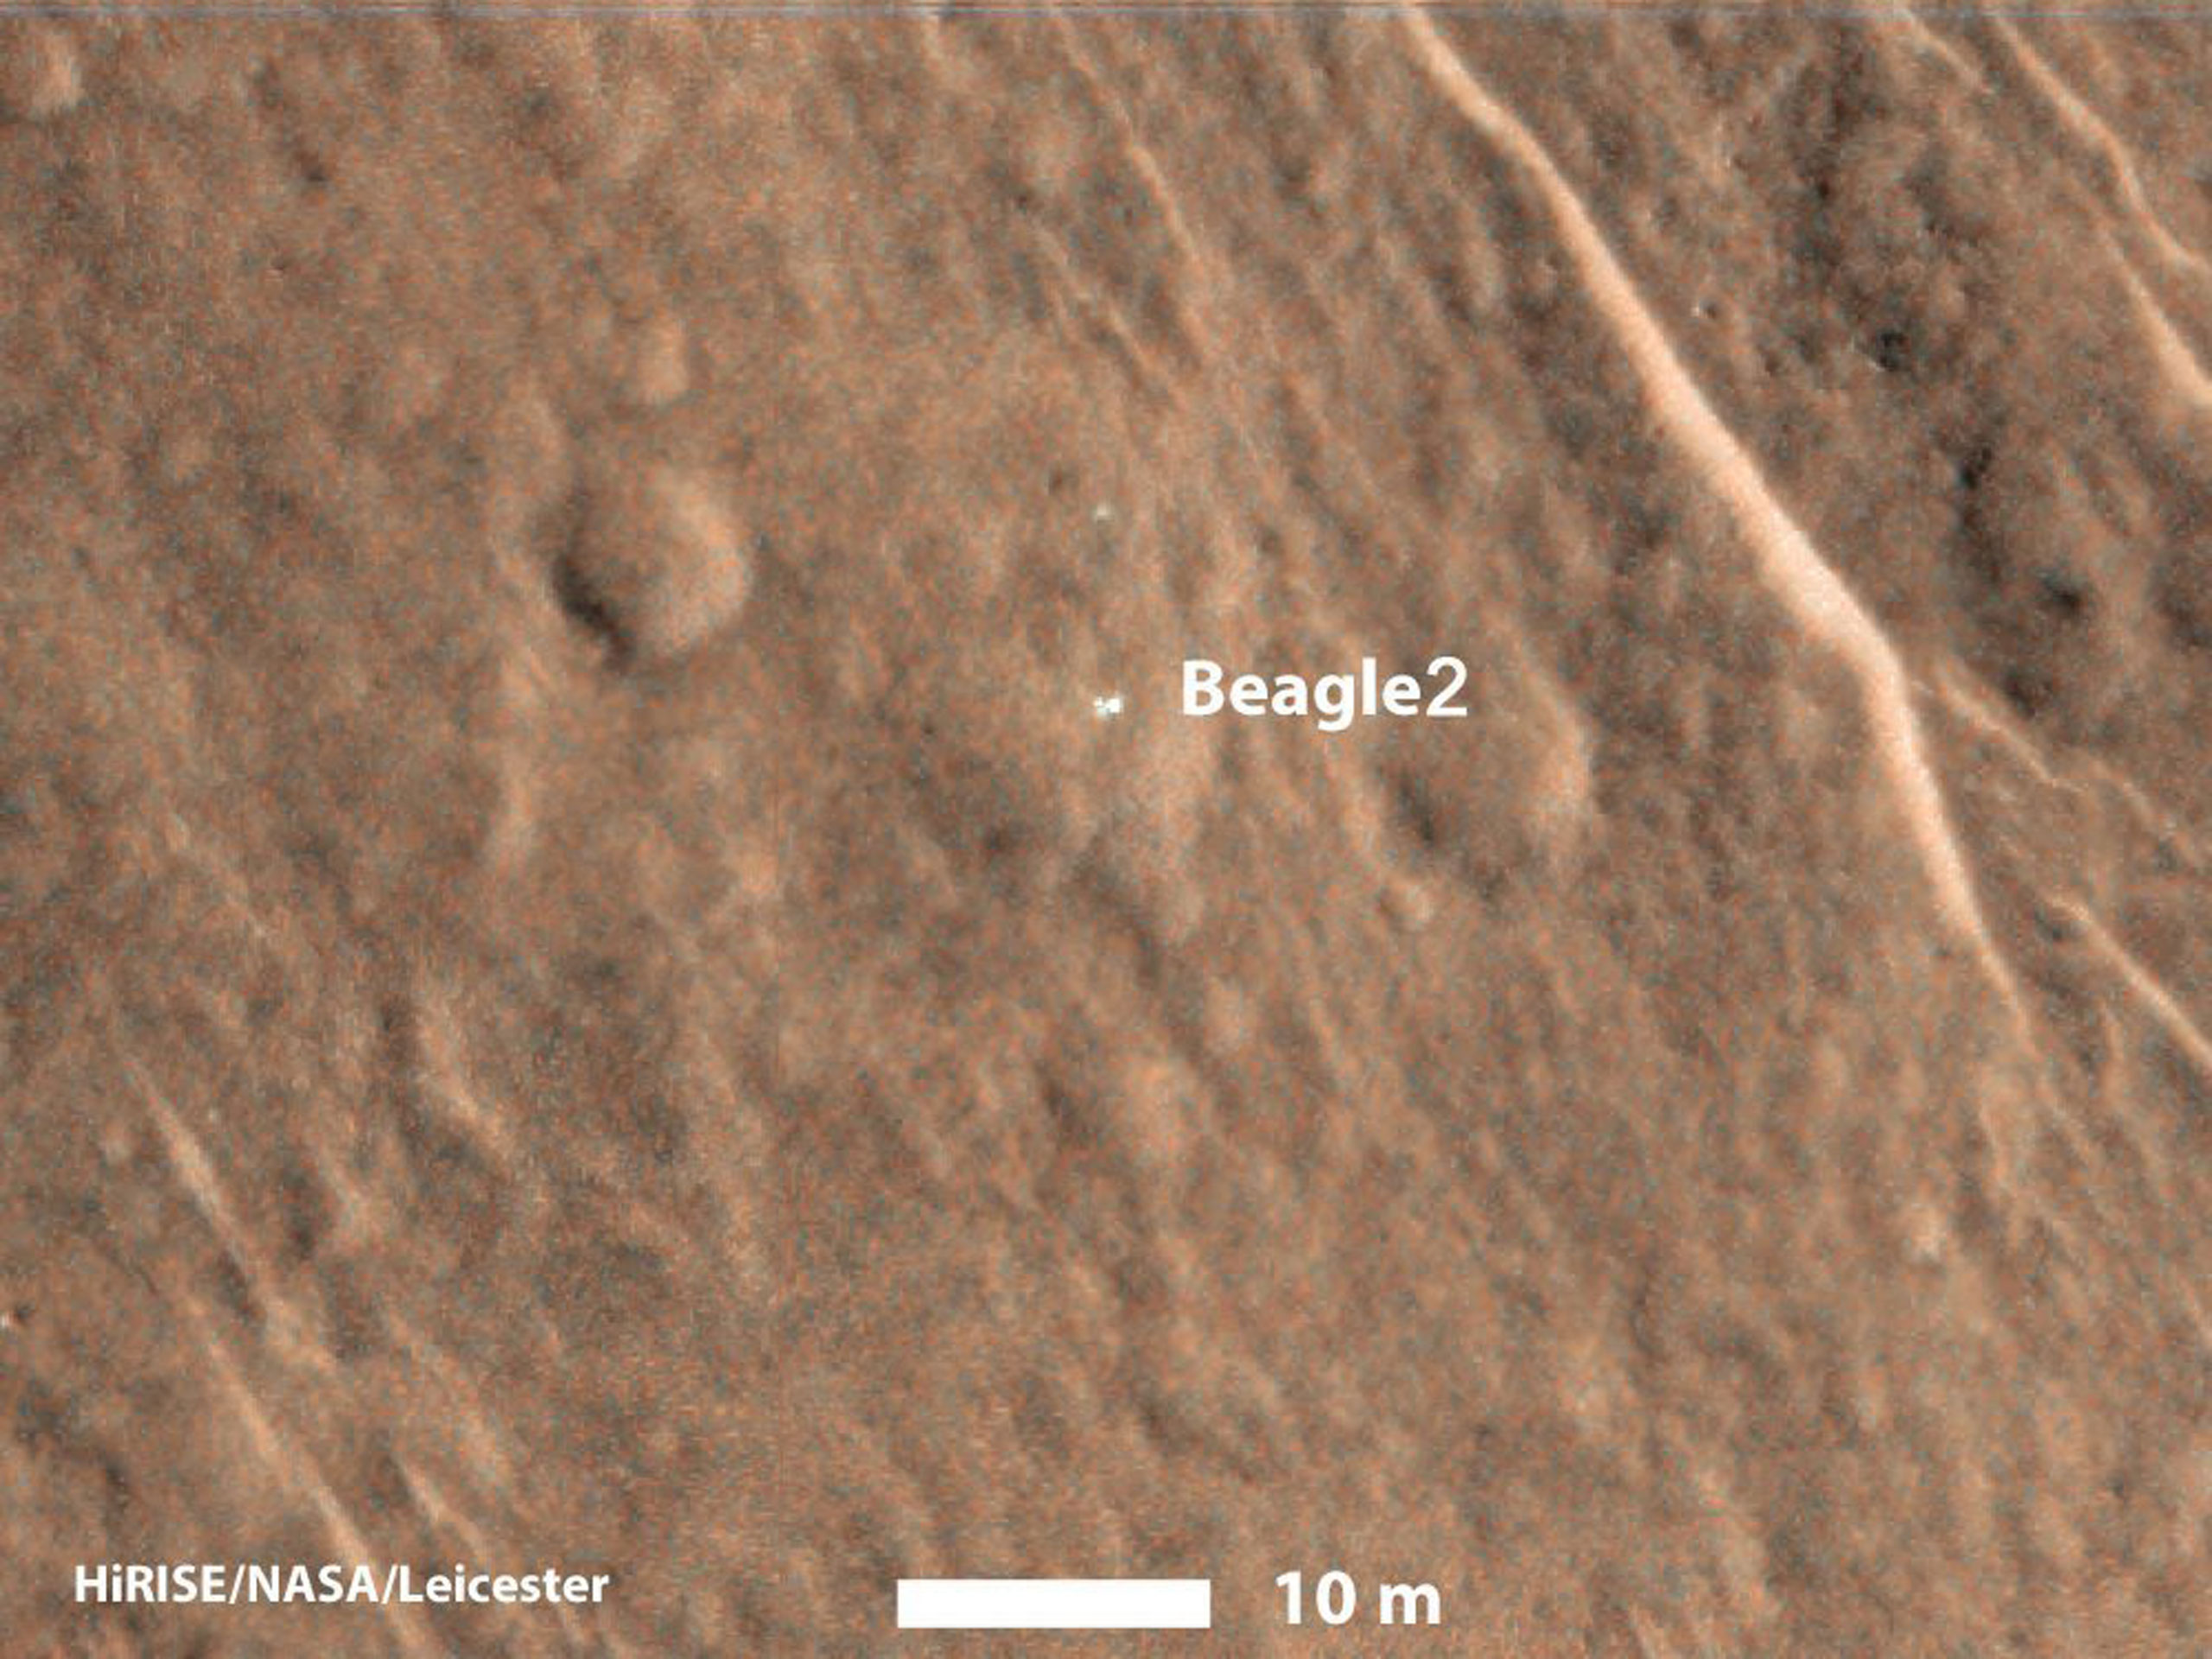 The UK-led Beagle-2 Mars lander, which was transported by ESA's Mars Express mission and was lost on Mars since 2003, on the Red Planet's surface, in a photo released on Jan. 16, 2015.